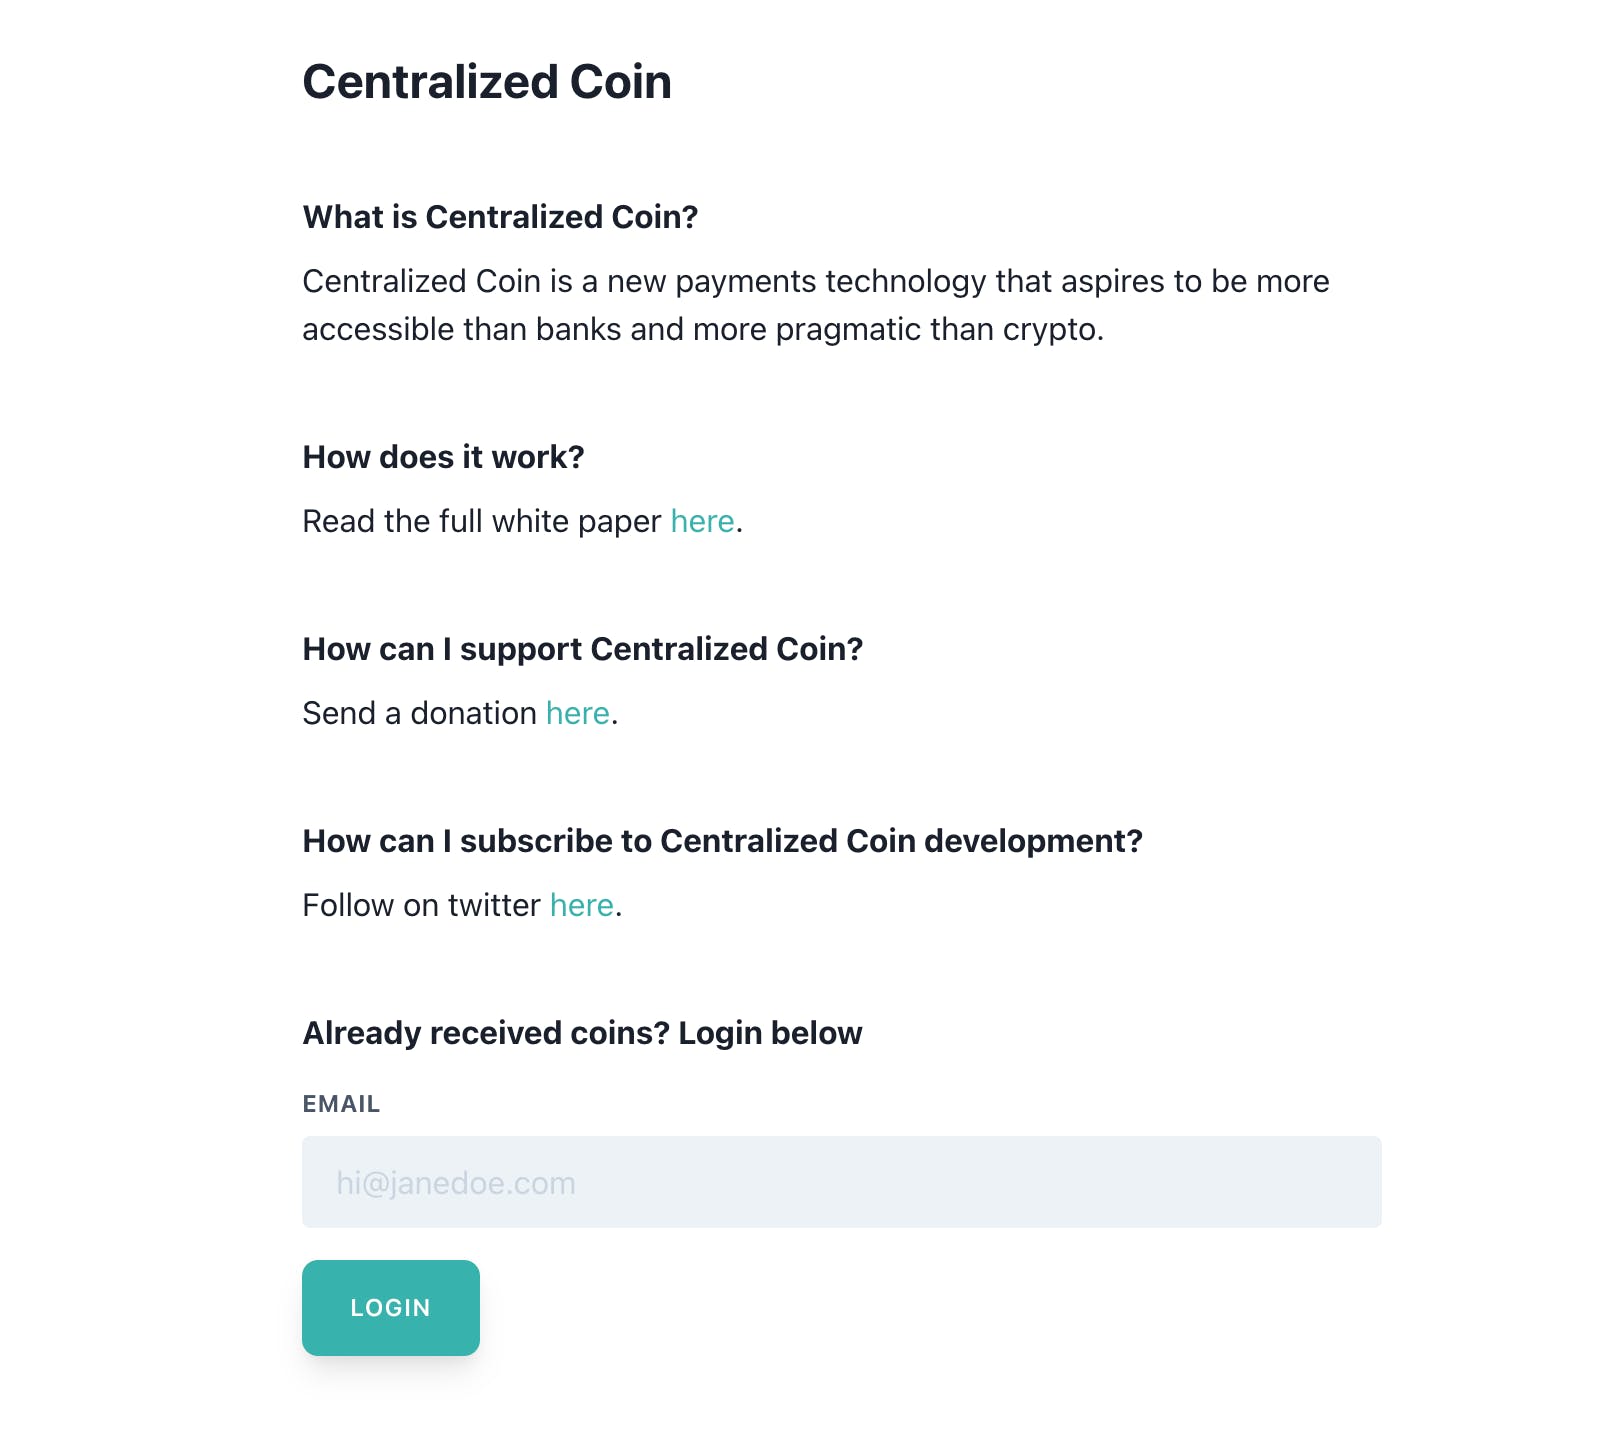 Centralized Coin media 1